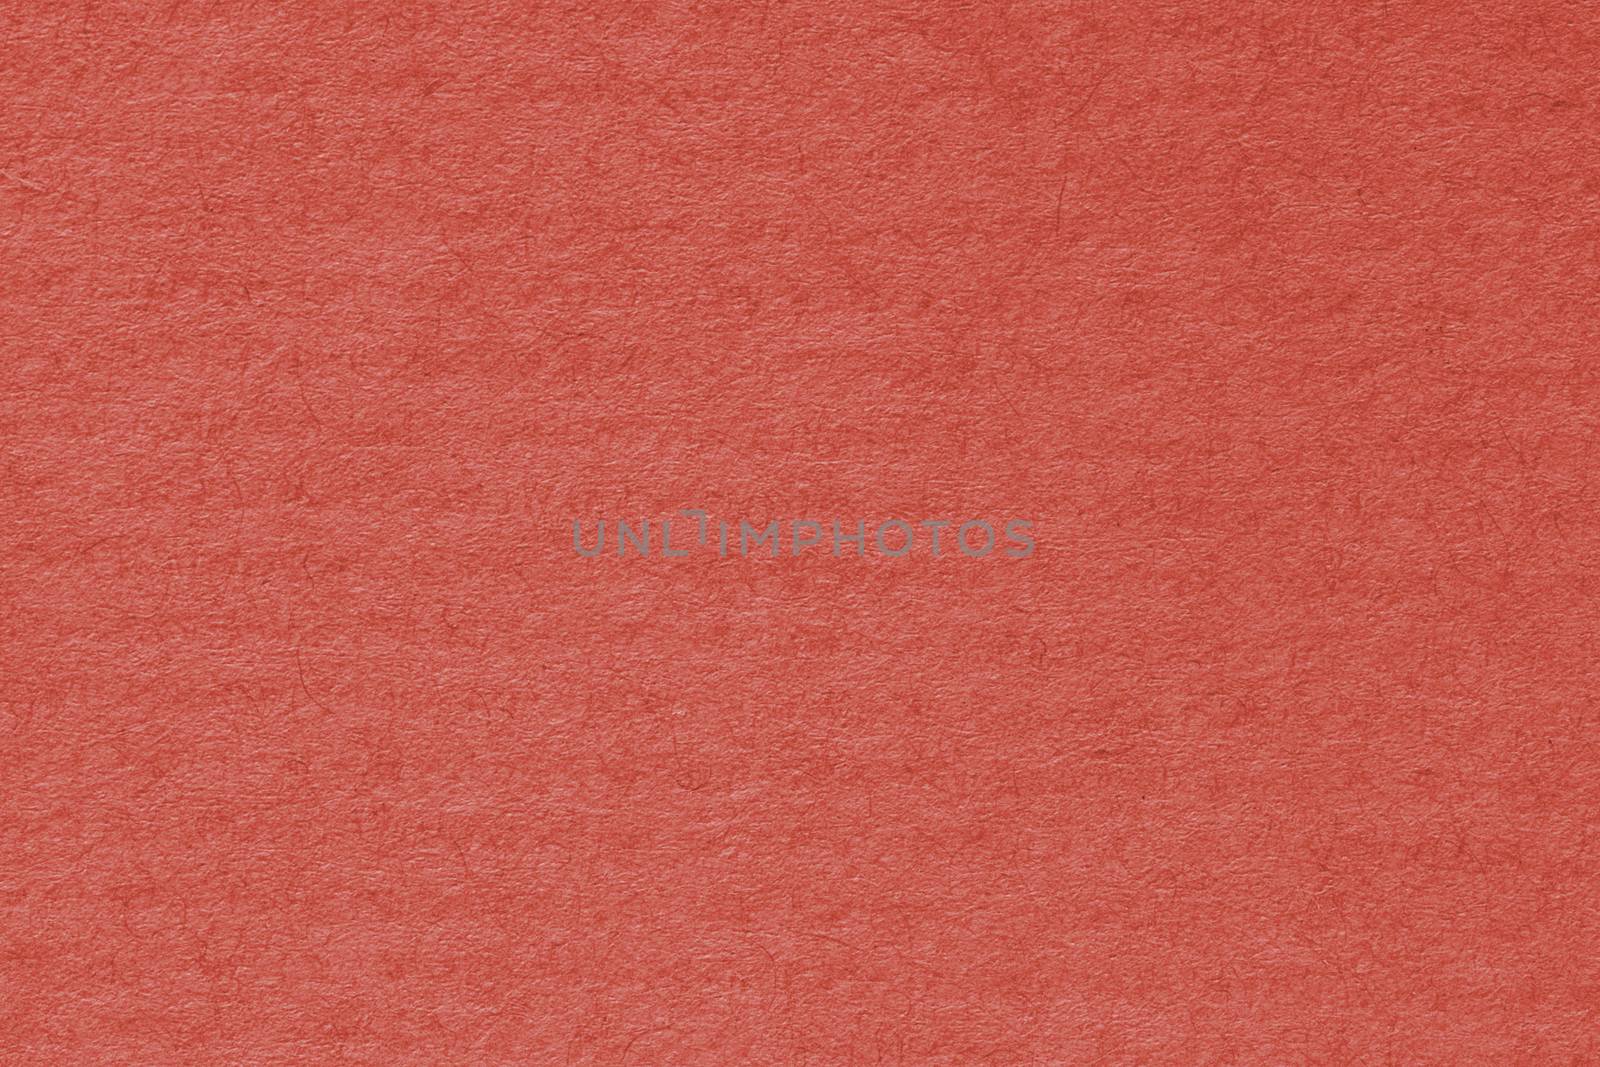 Red washed paper texture background. Recycled paper texture